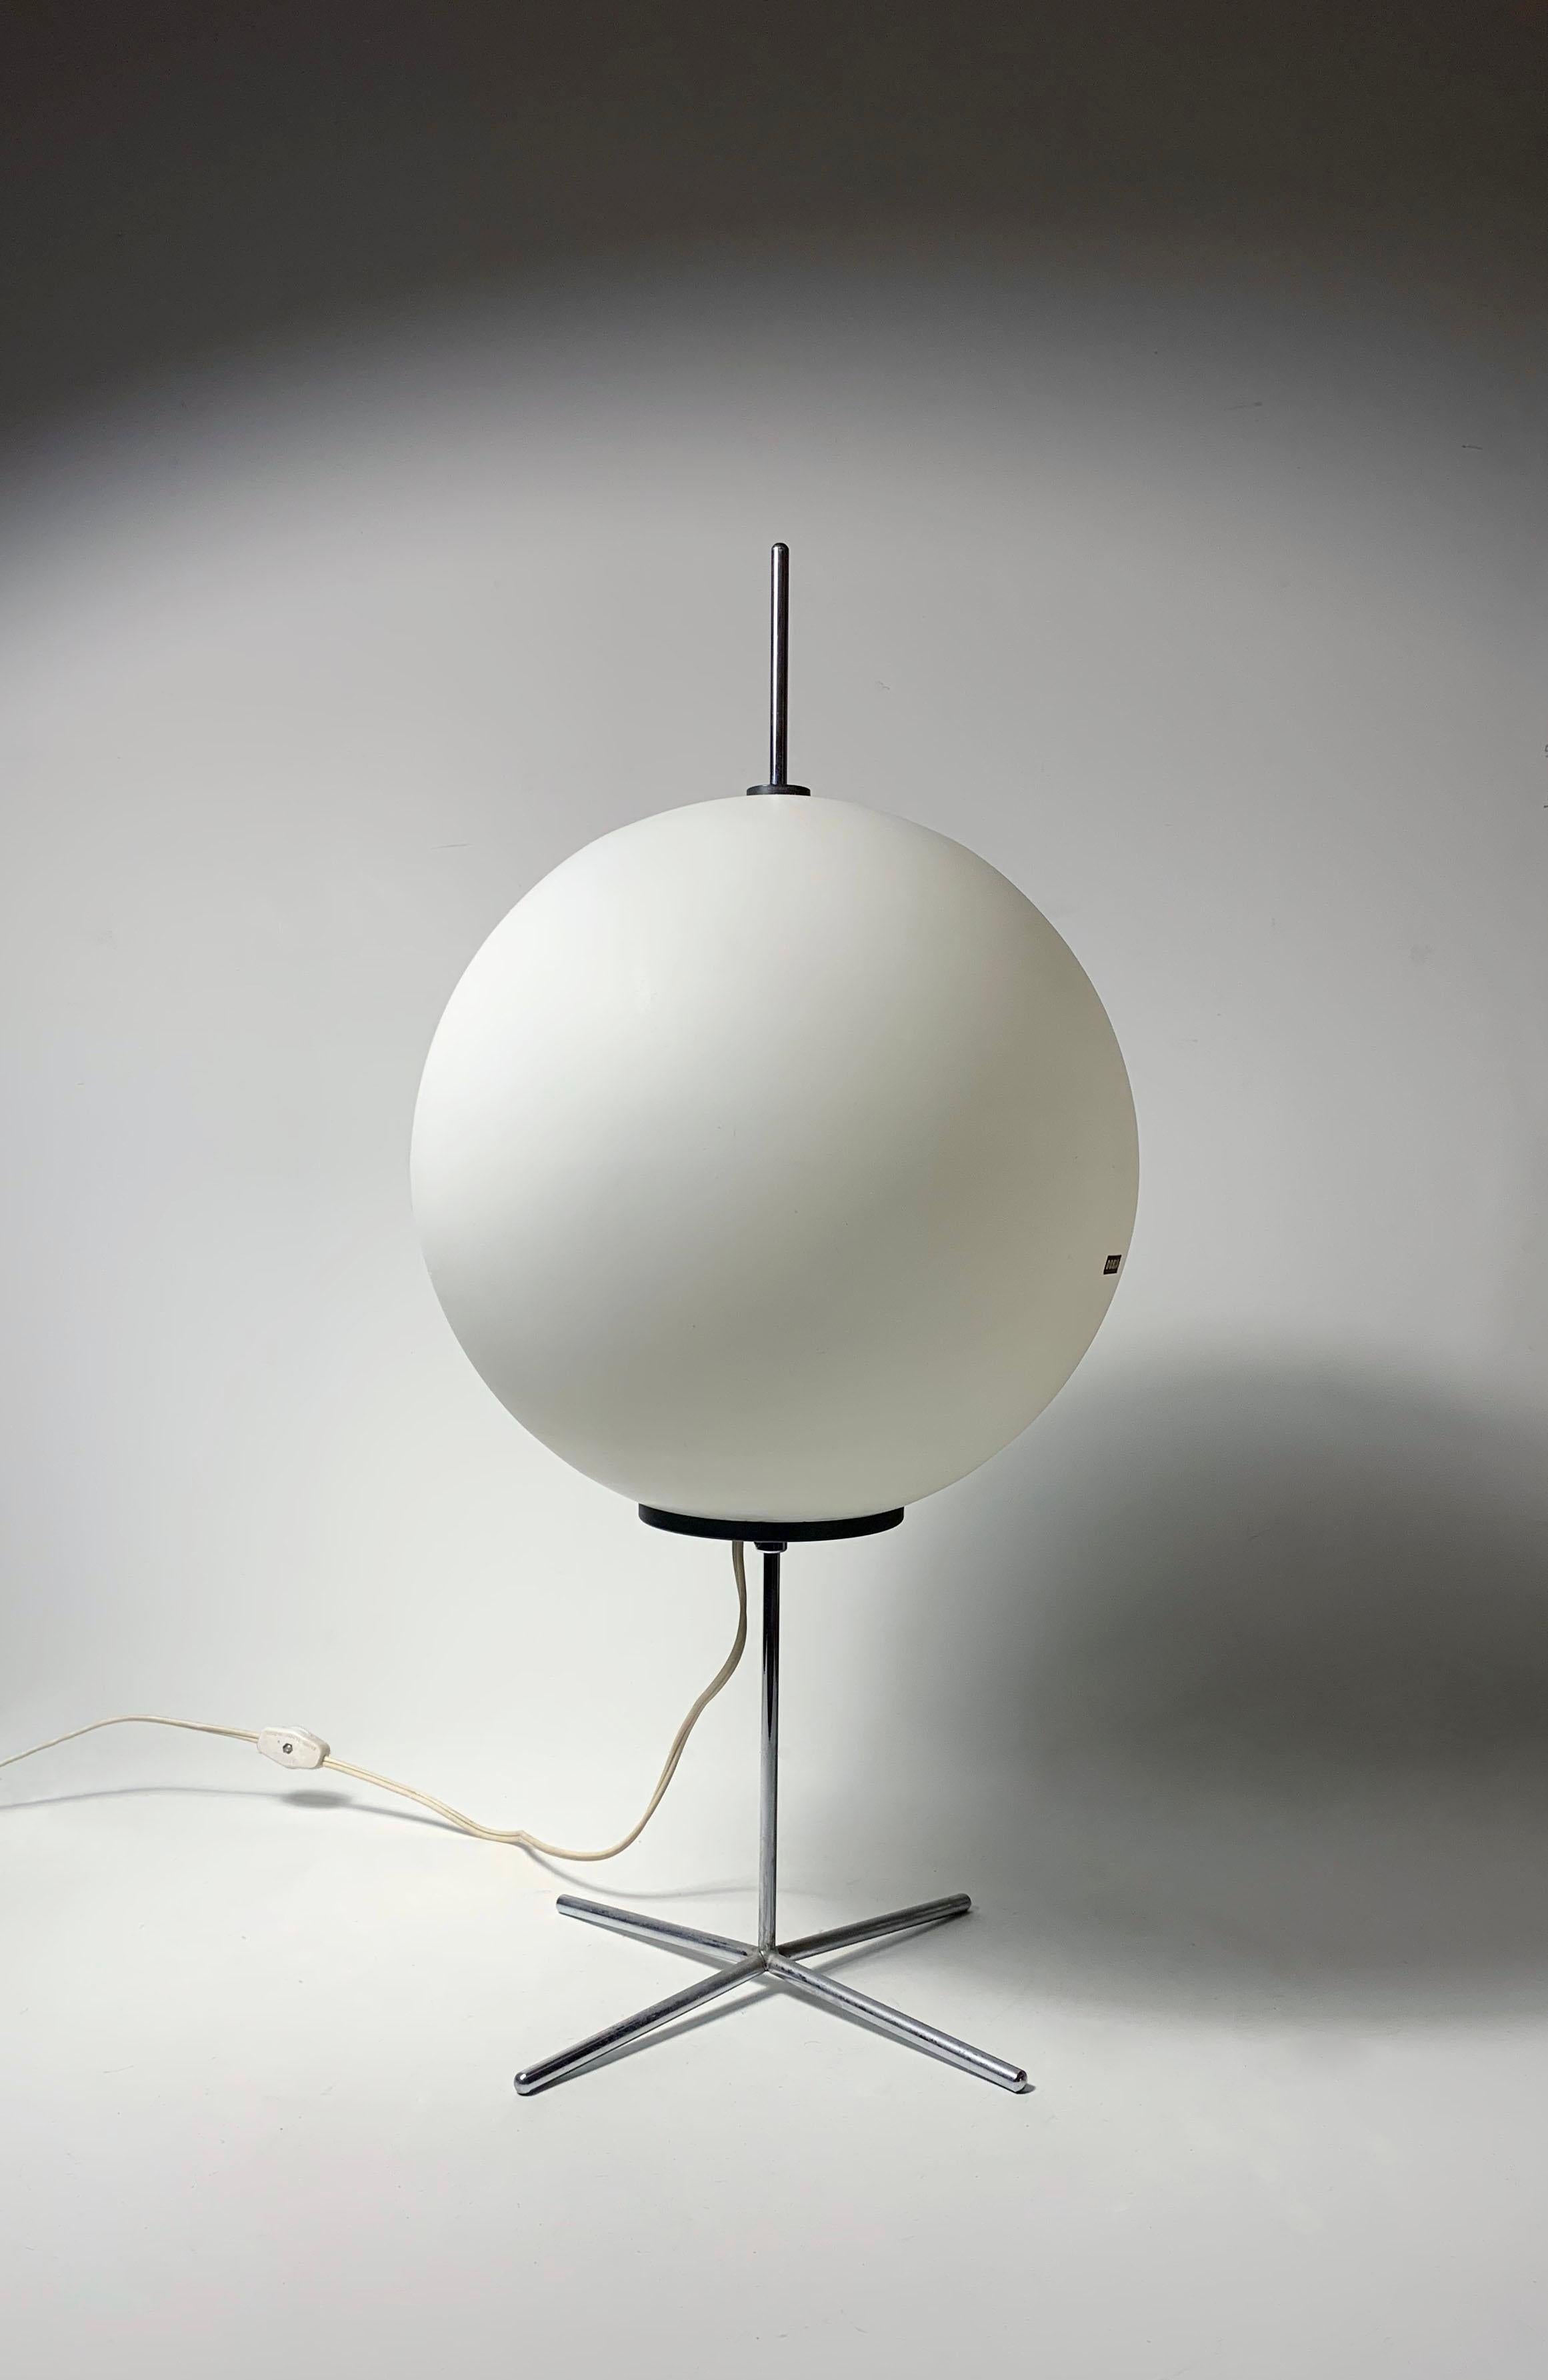 Minimalist table lamp by Wilhelm Braun Feldweg for Doria Leuchten . A translucent glass globe floating on a chromed cruciform base. 

Sticker remains on the globe and the underside. 

Some light ware as shown.